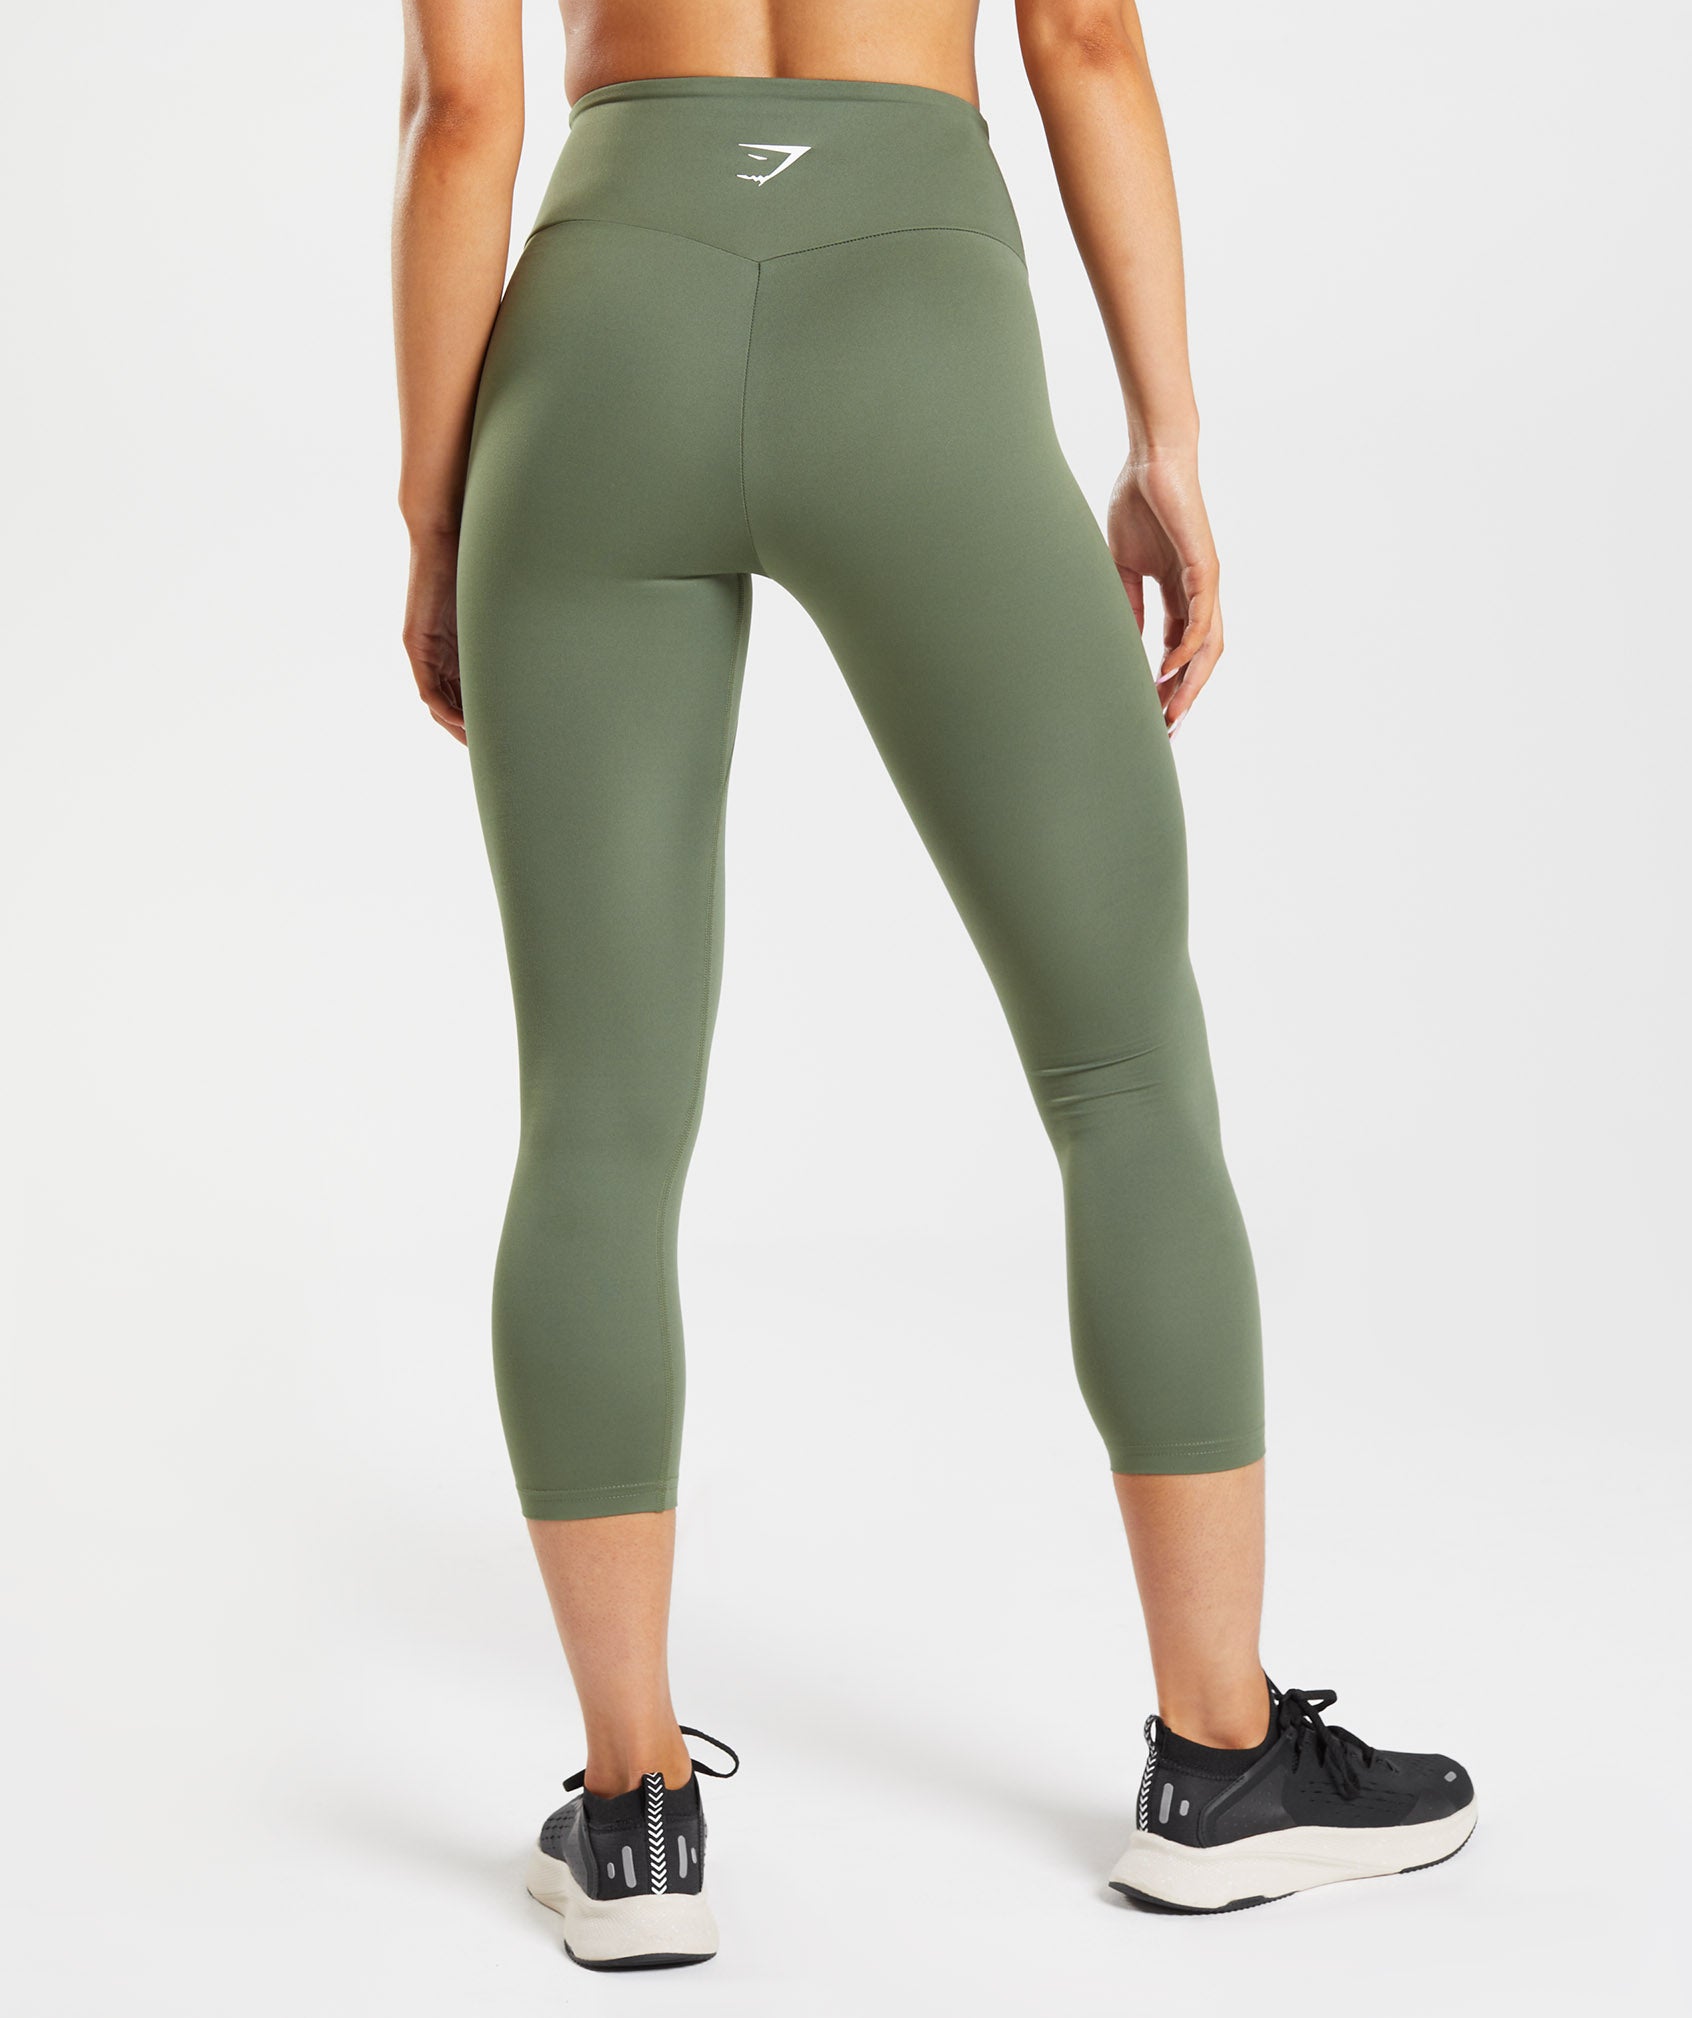 Training 7/8 Leggings in Core Olive - view 2